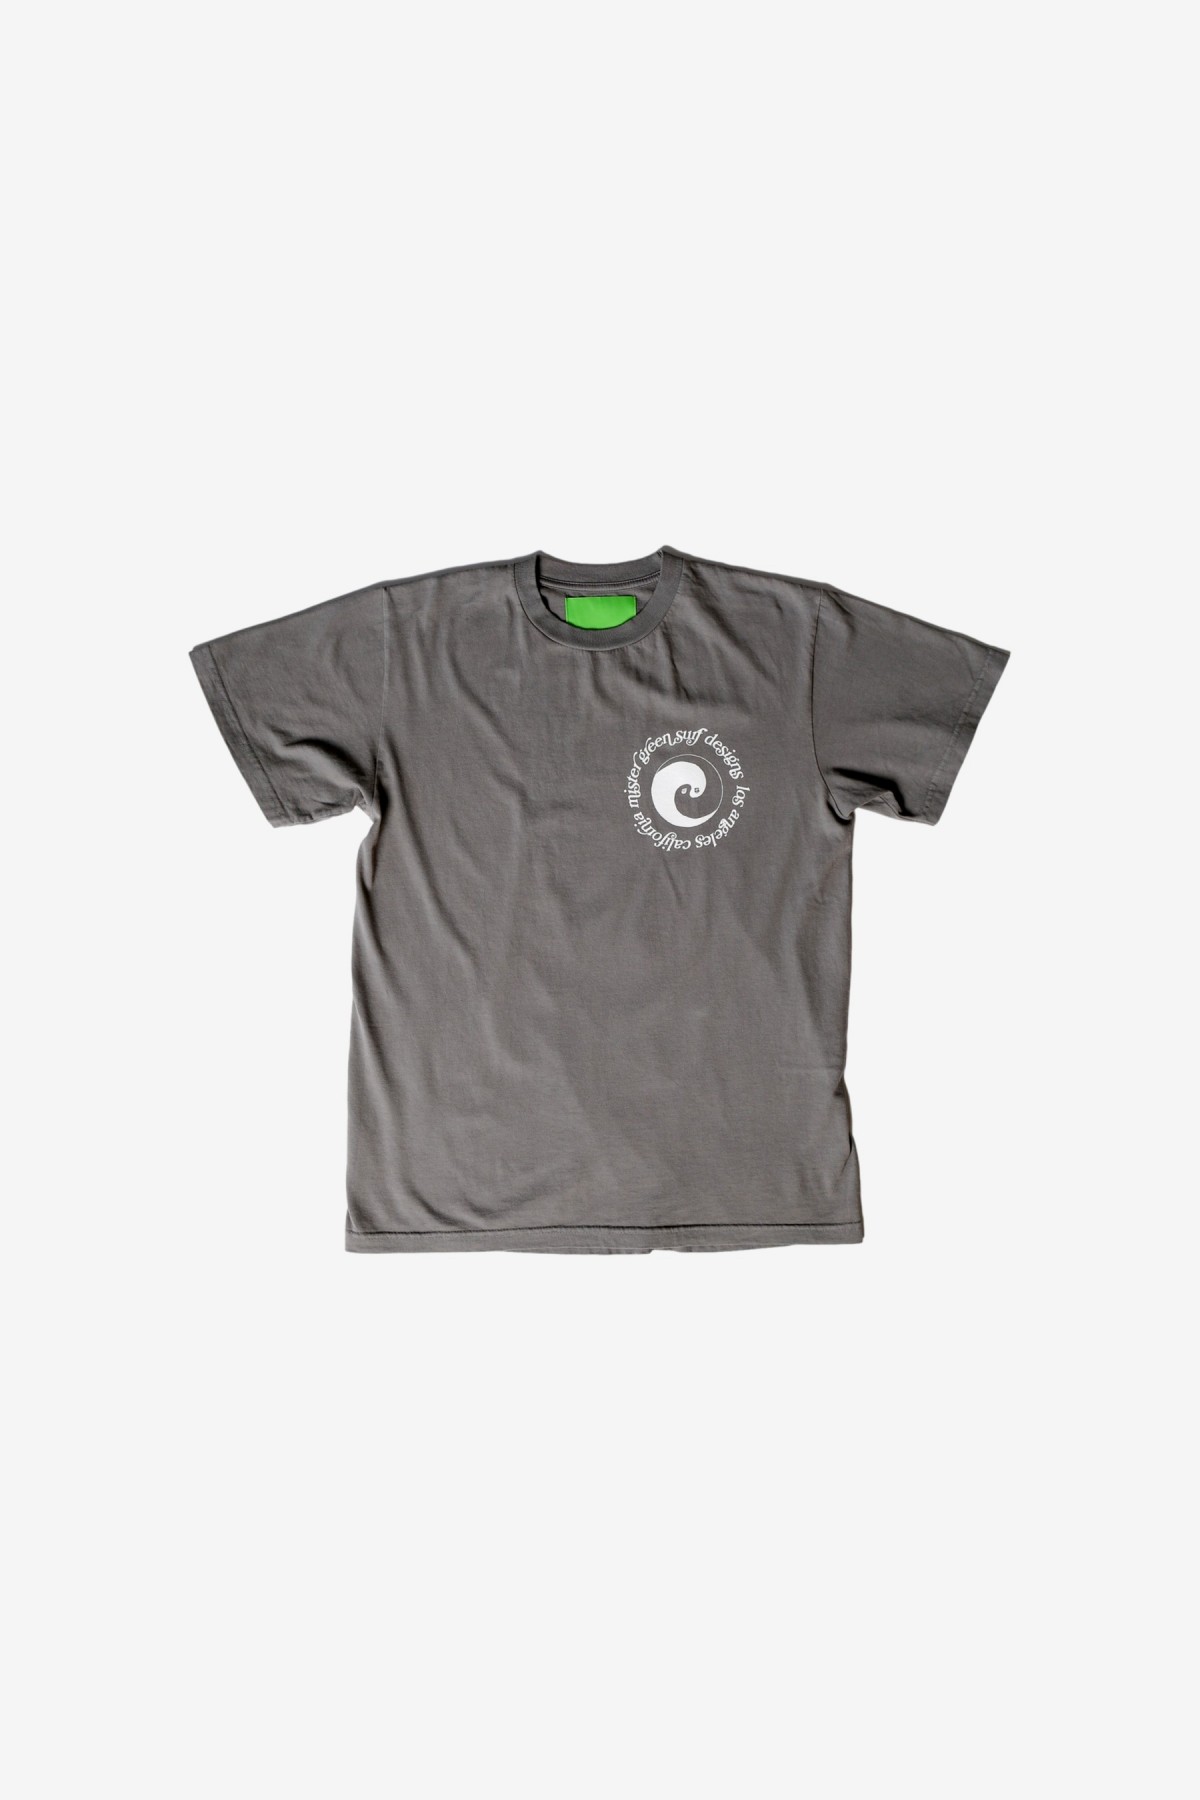 Mister Green Dualism Surf V2 Tee in Washed Grey